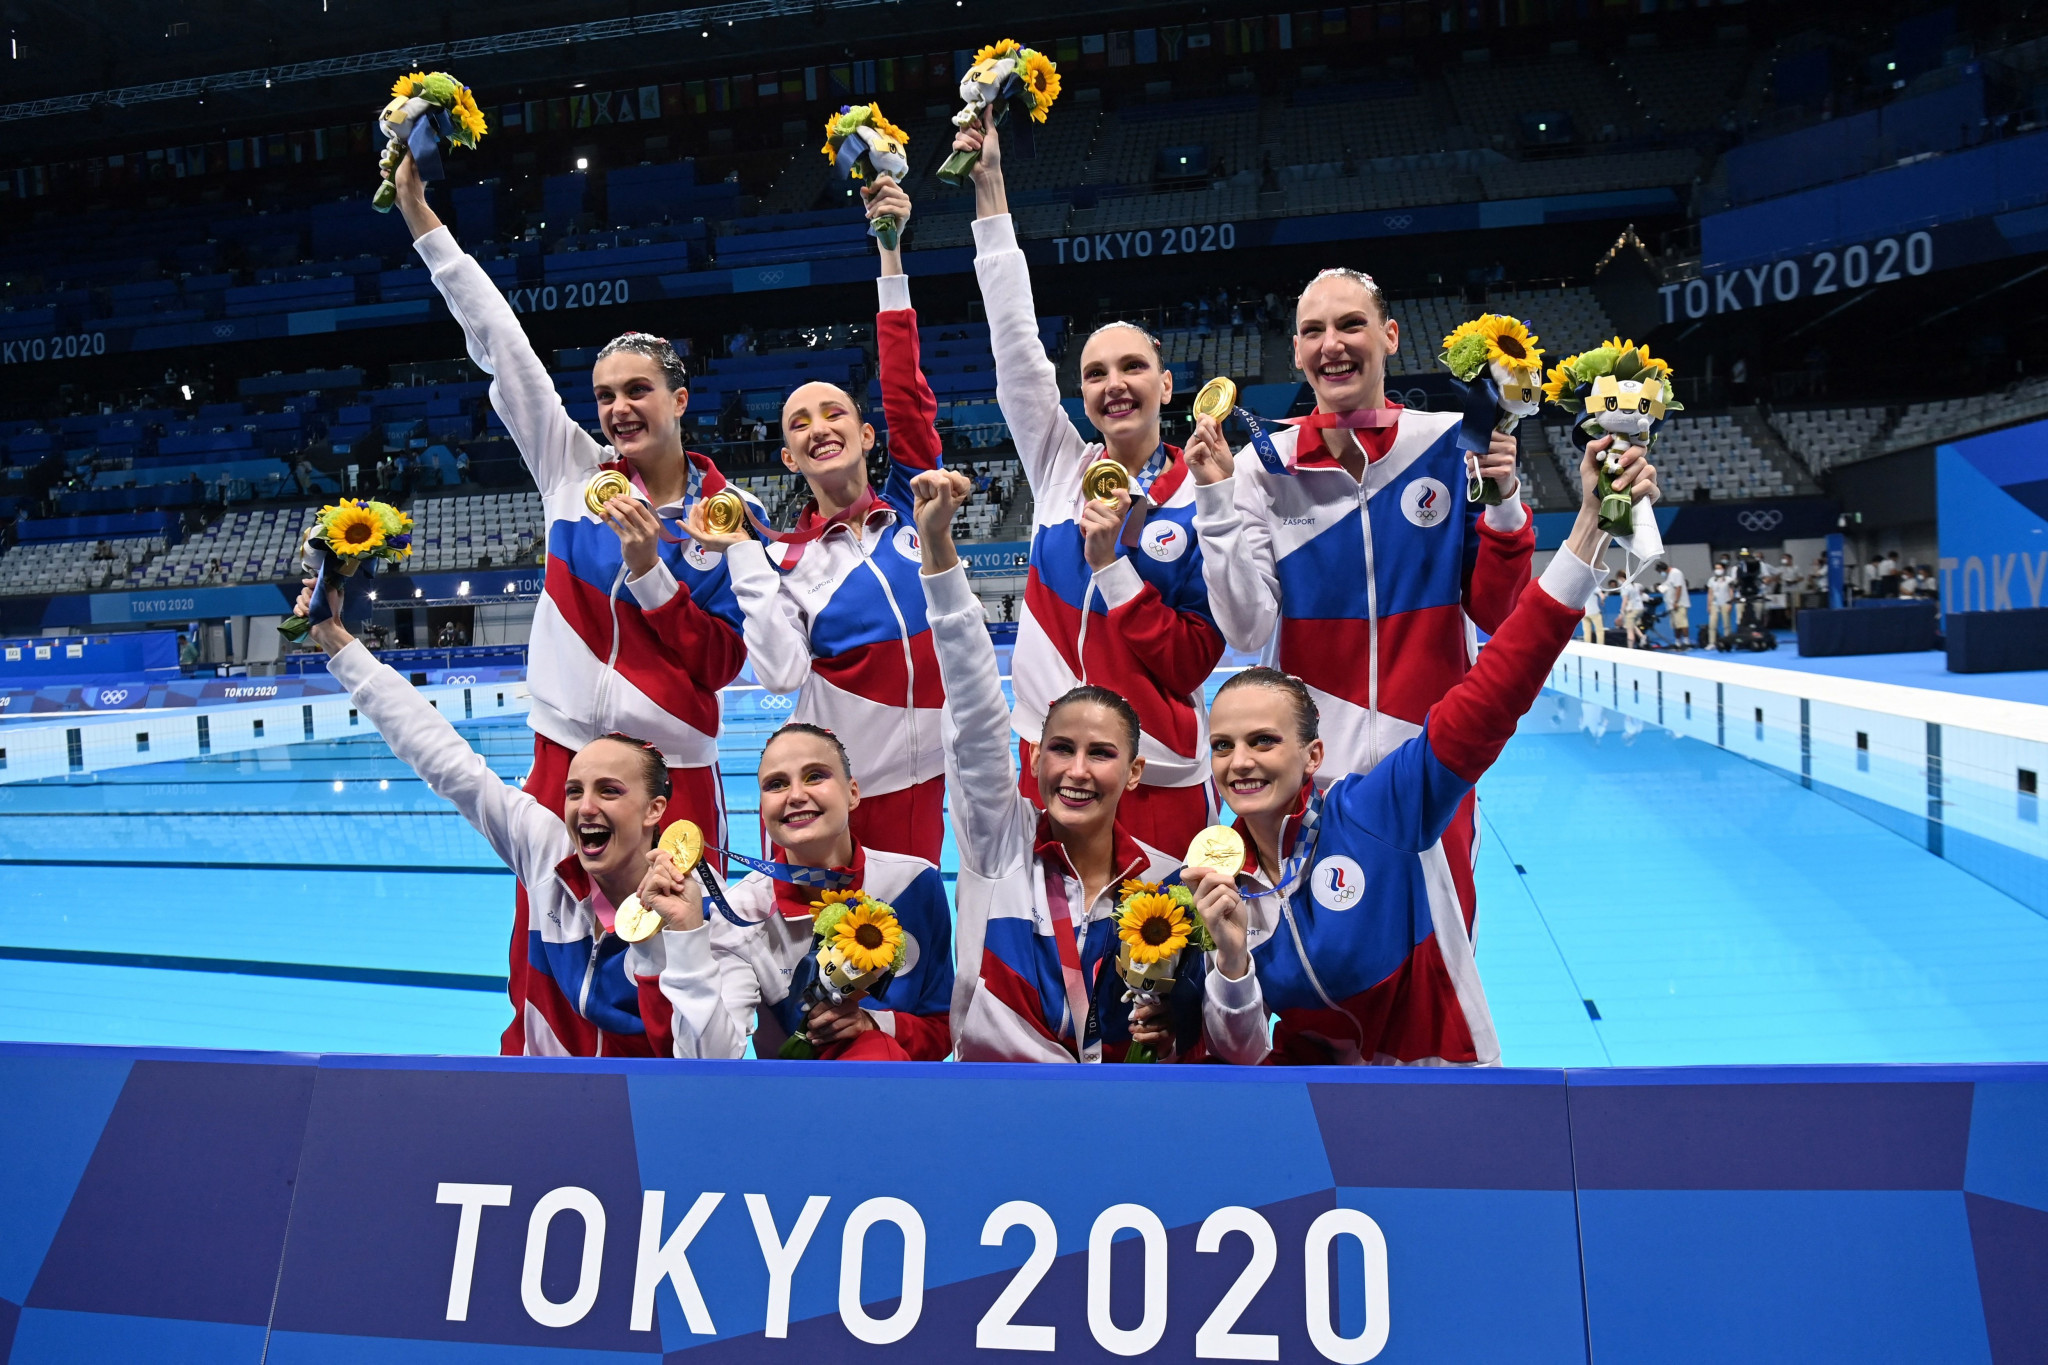 The Russian Olympic Committee overcame China to win the team title at Tokyo 2020 ©Getty Images